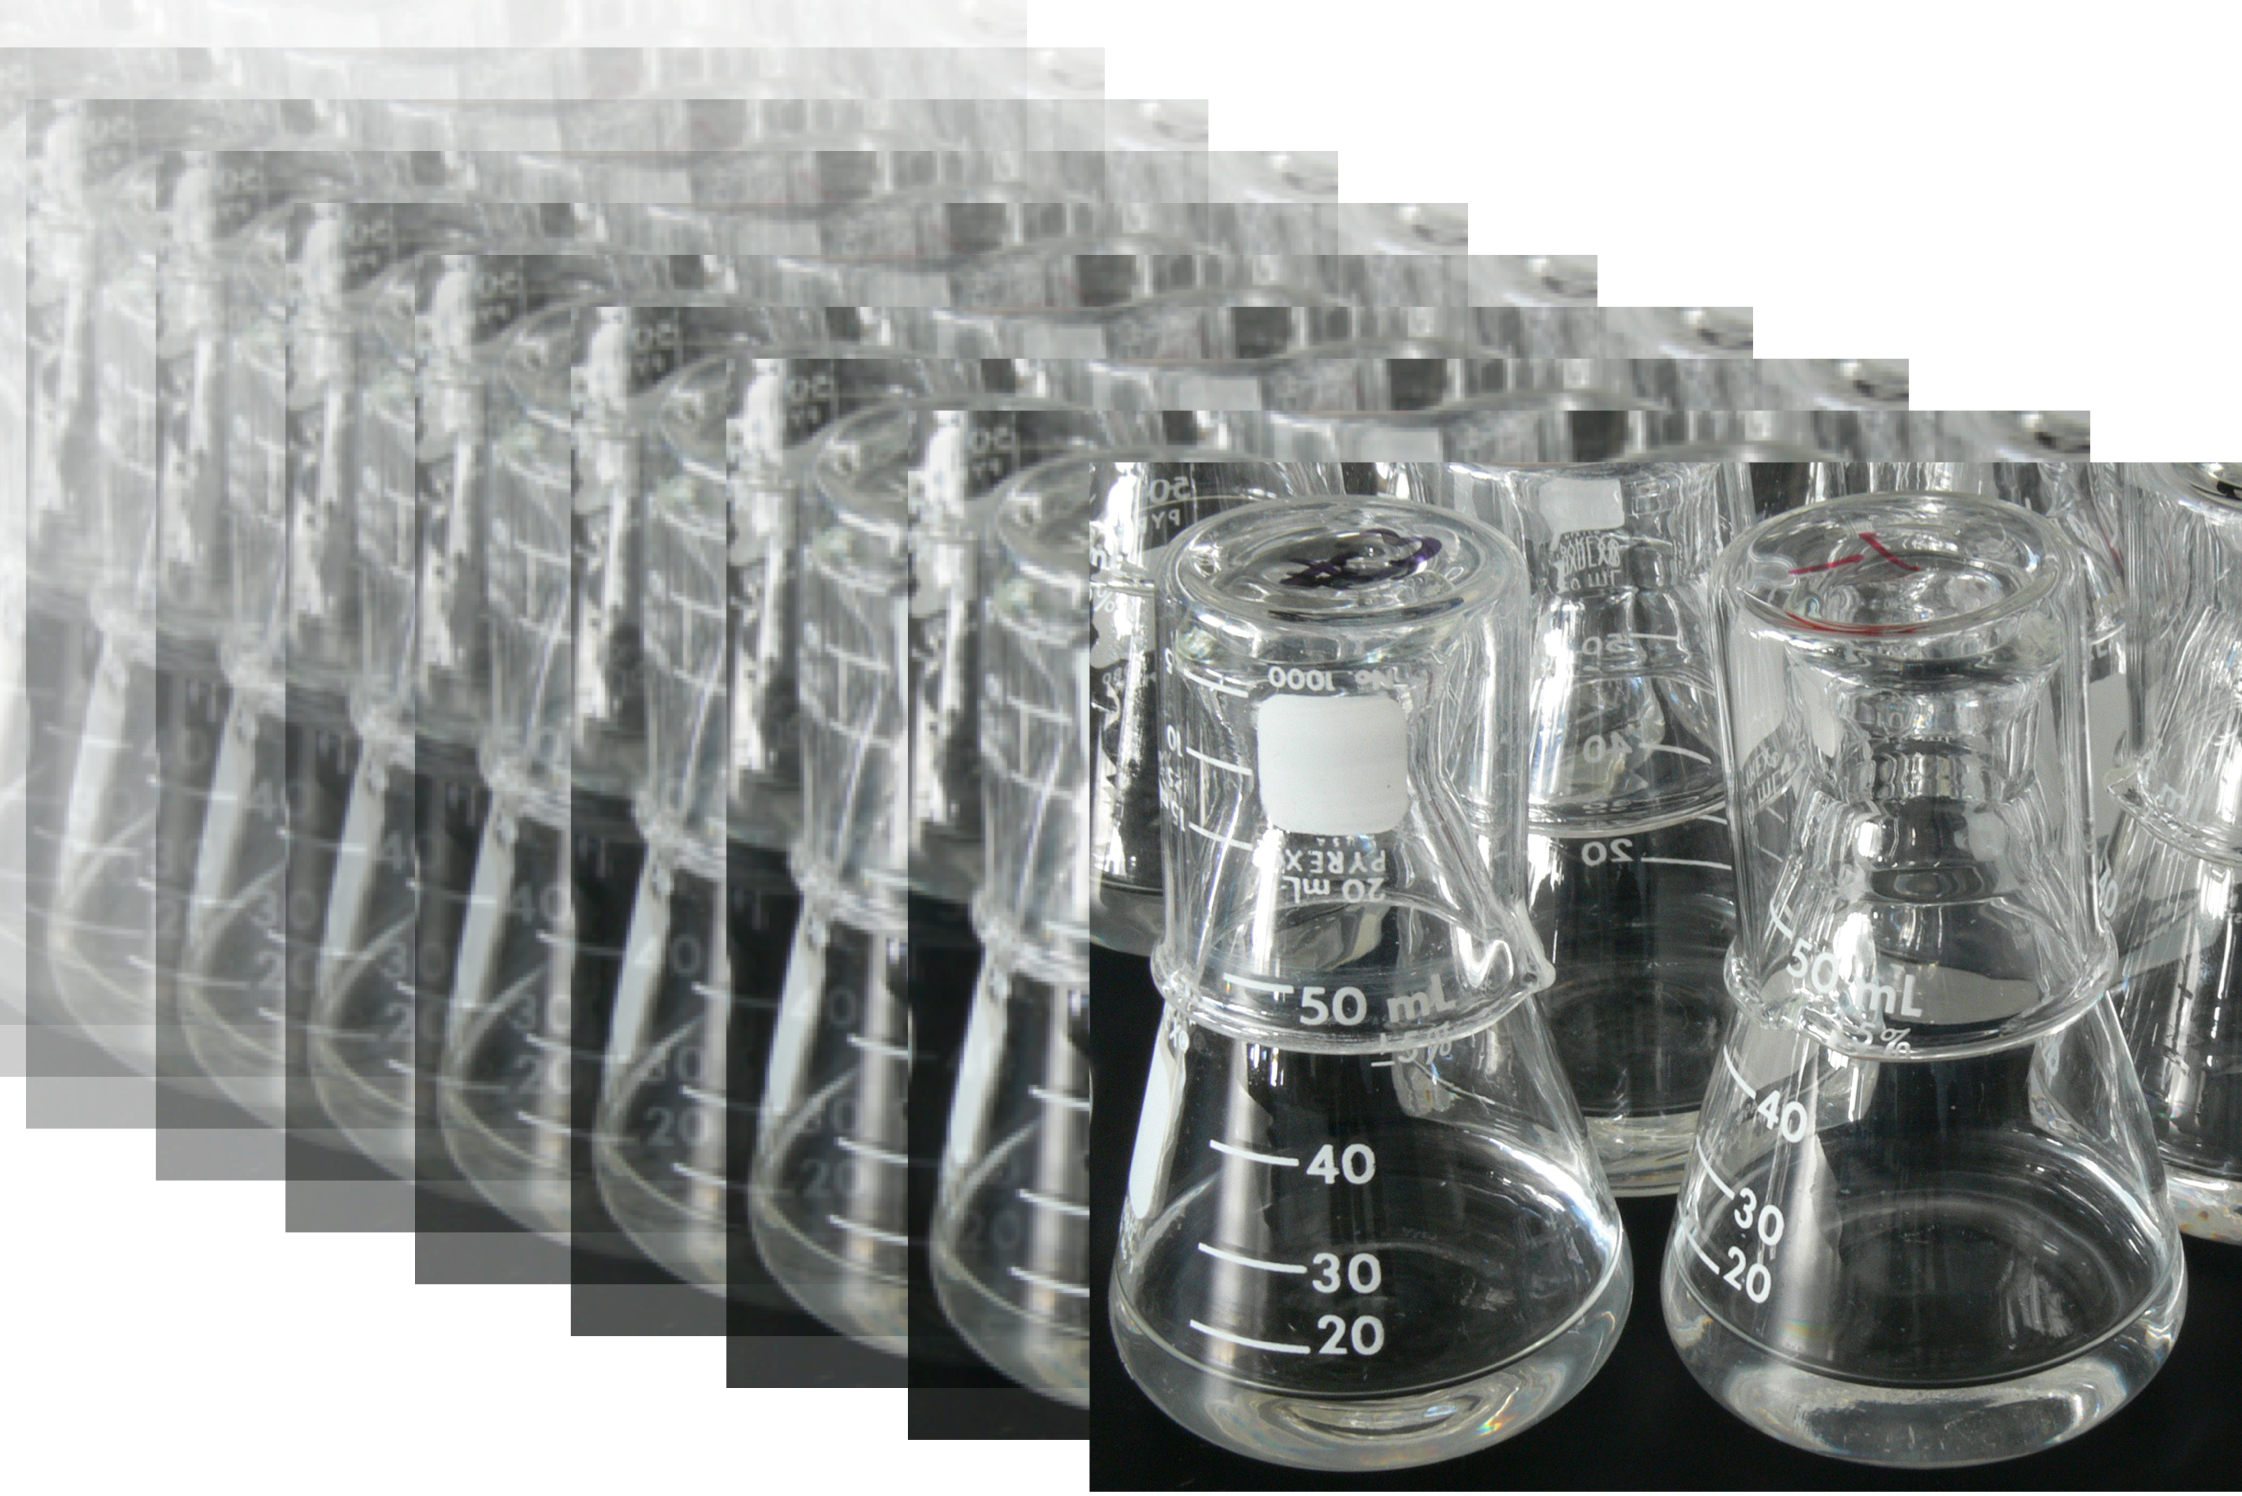 Glass flasks used in long-term experimental evolution project